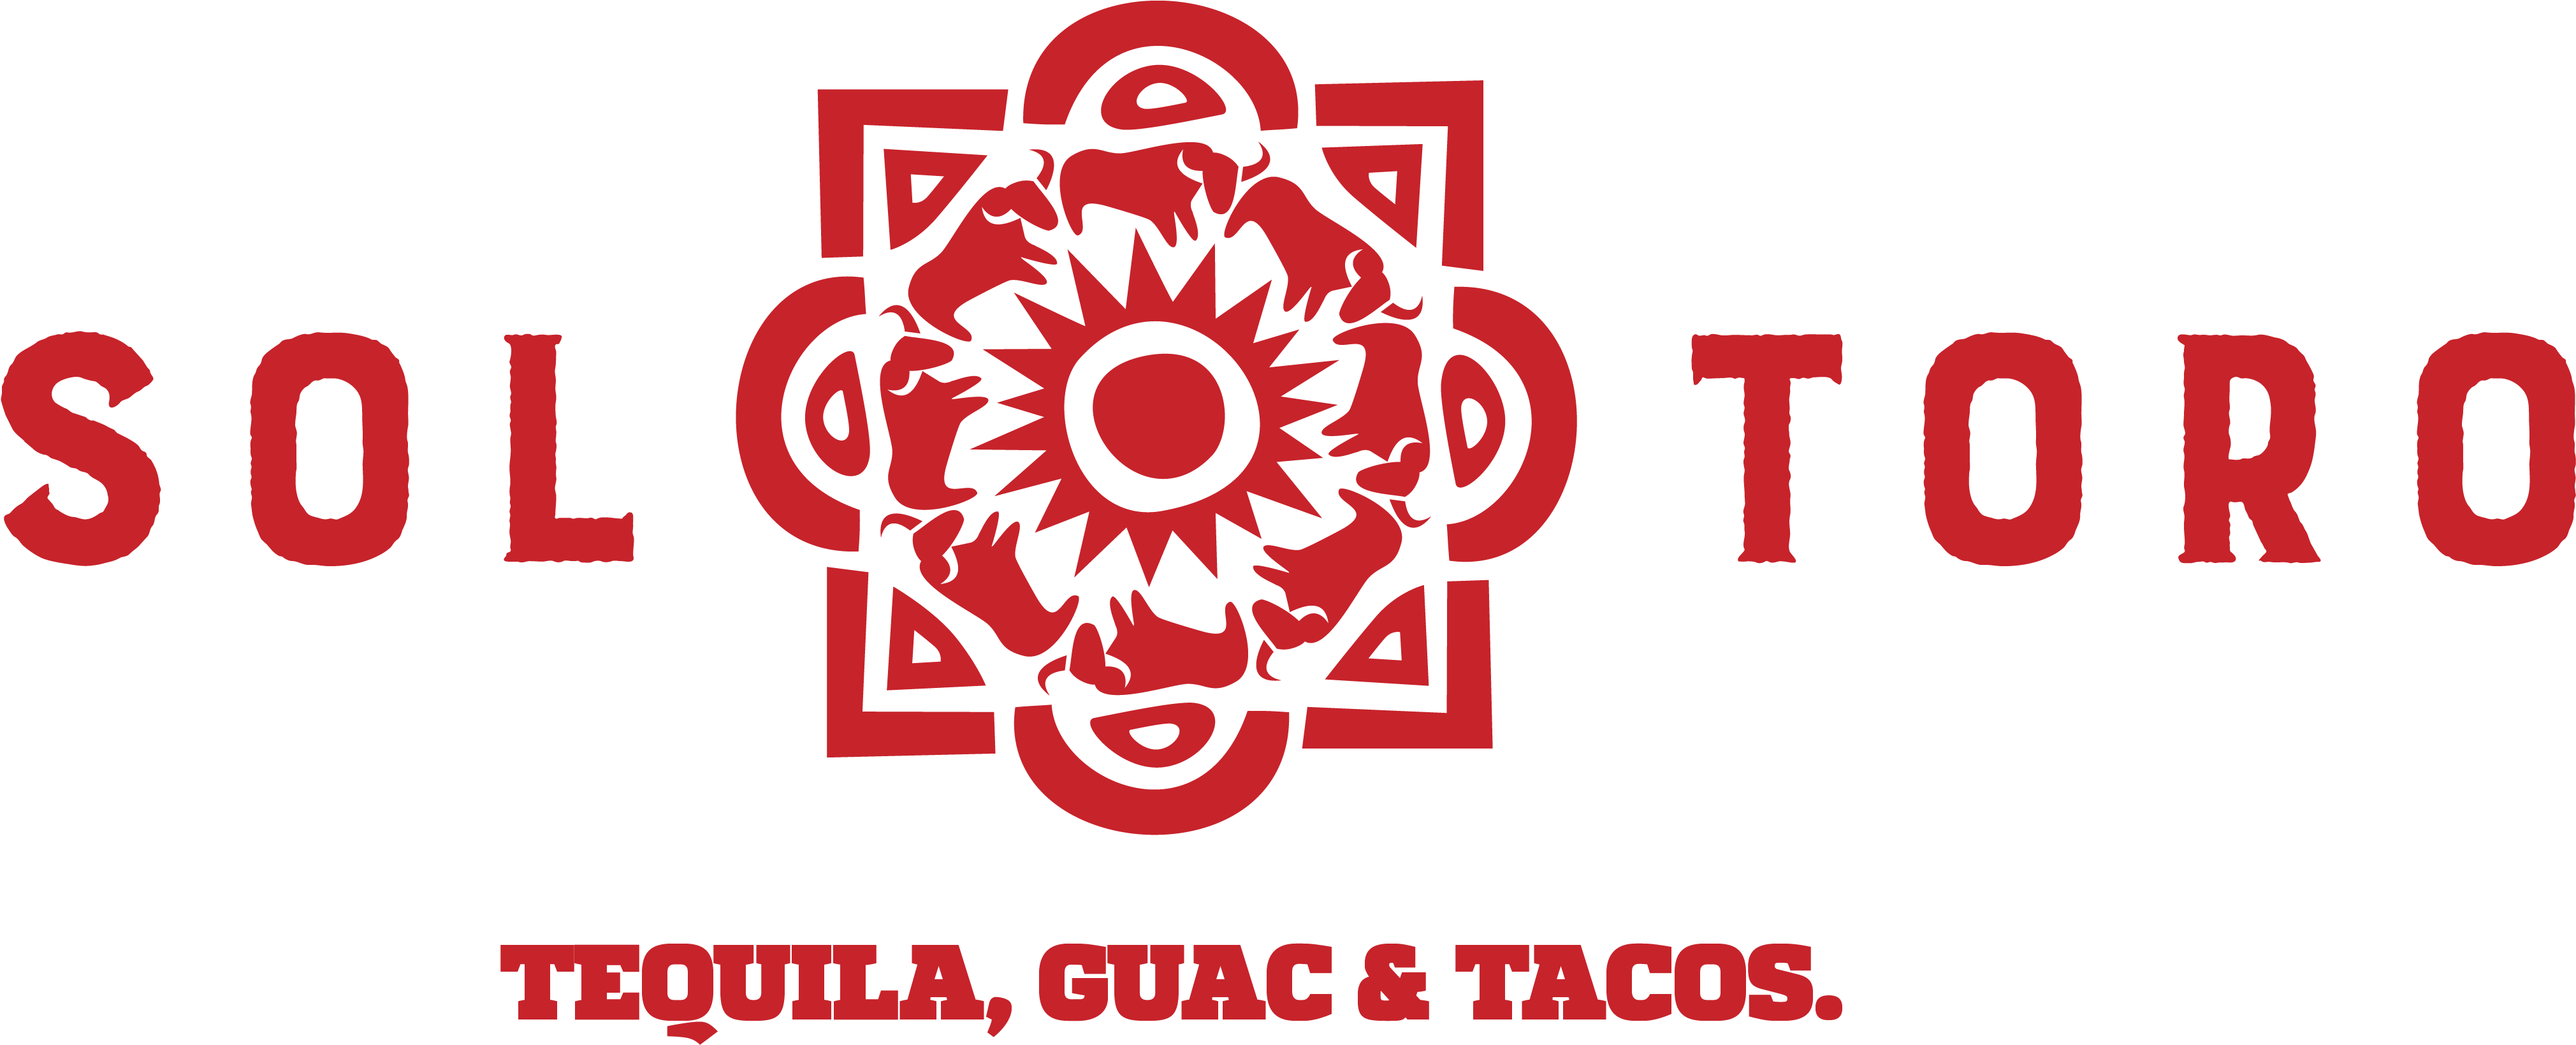 Soltoro Blends Traditional Mexican Flavors With A Modern - Soltoro Tequila Grill (4188x1649), Png Download